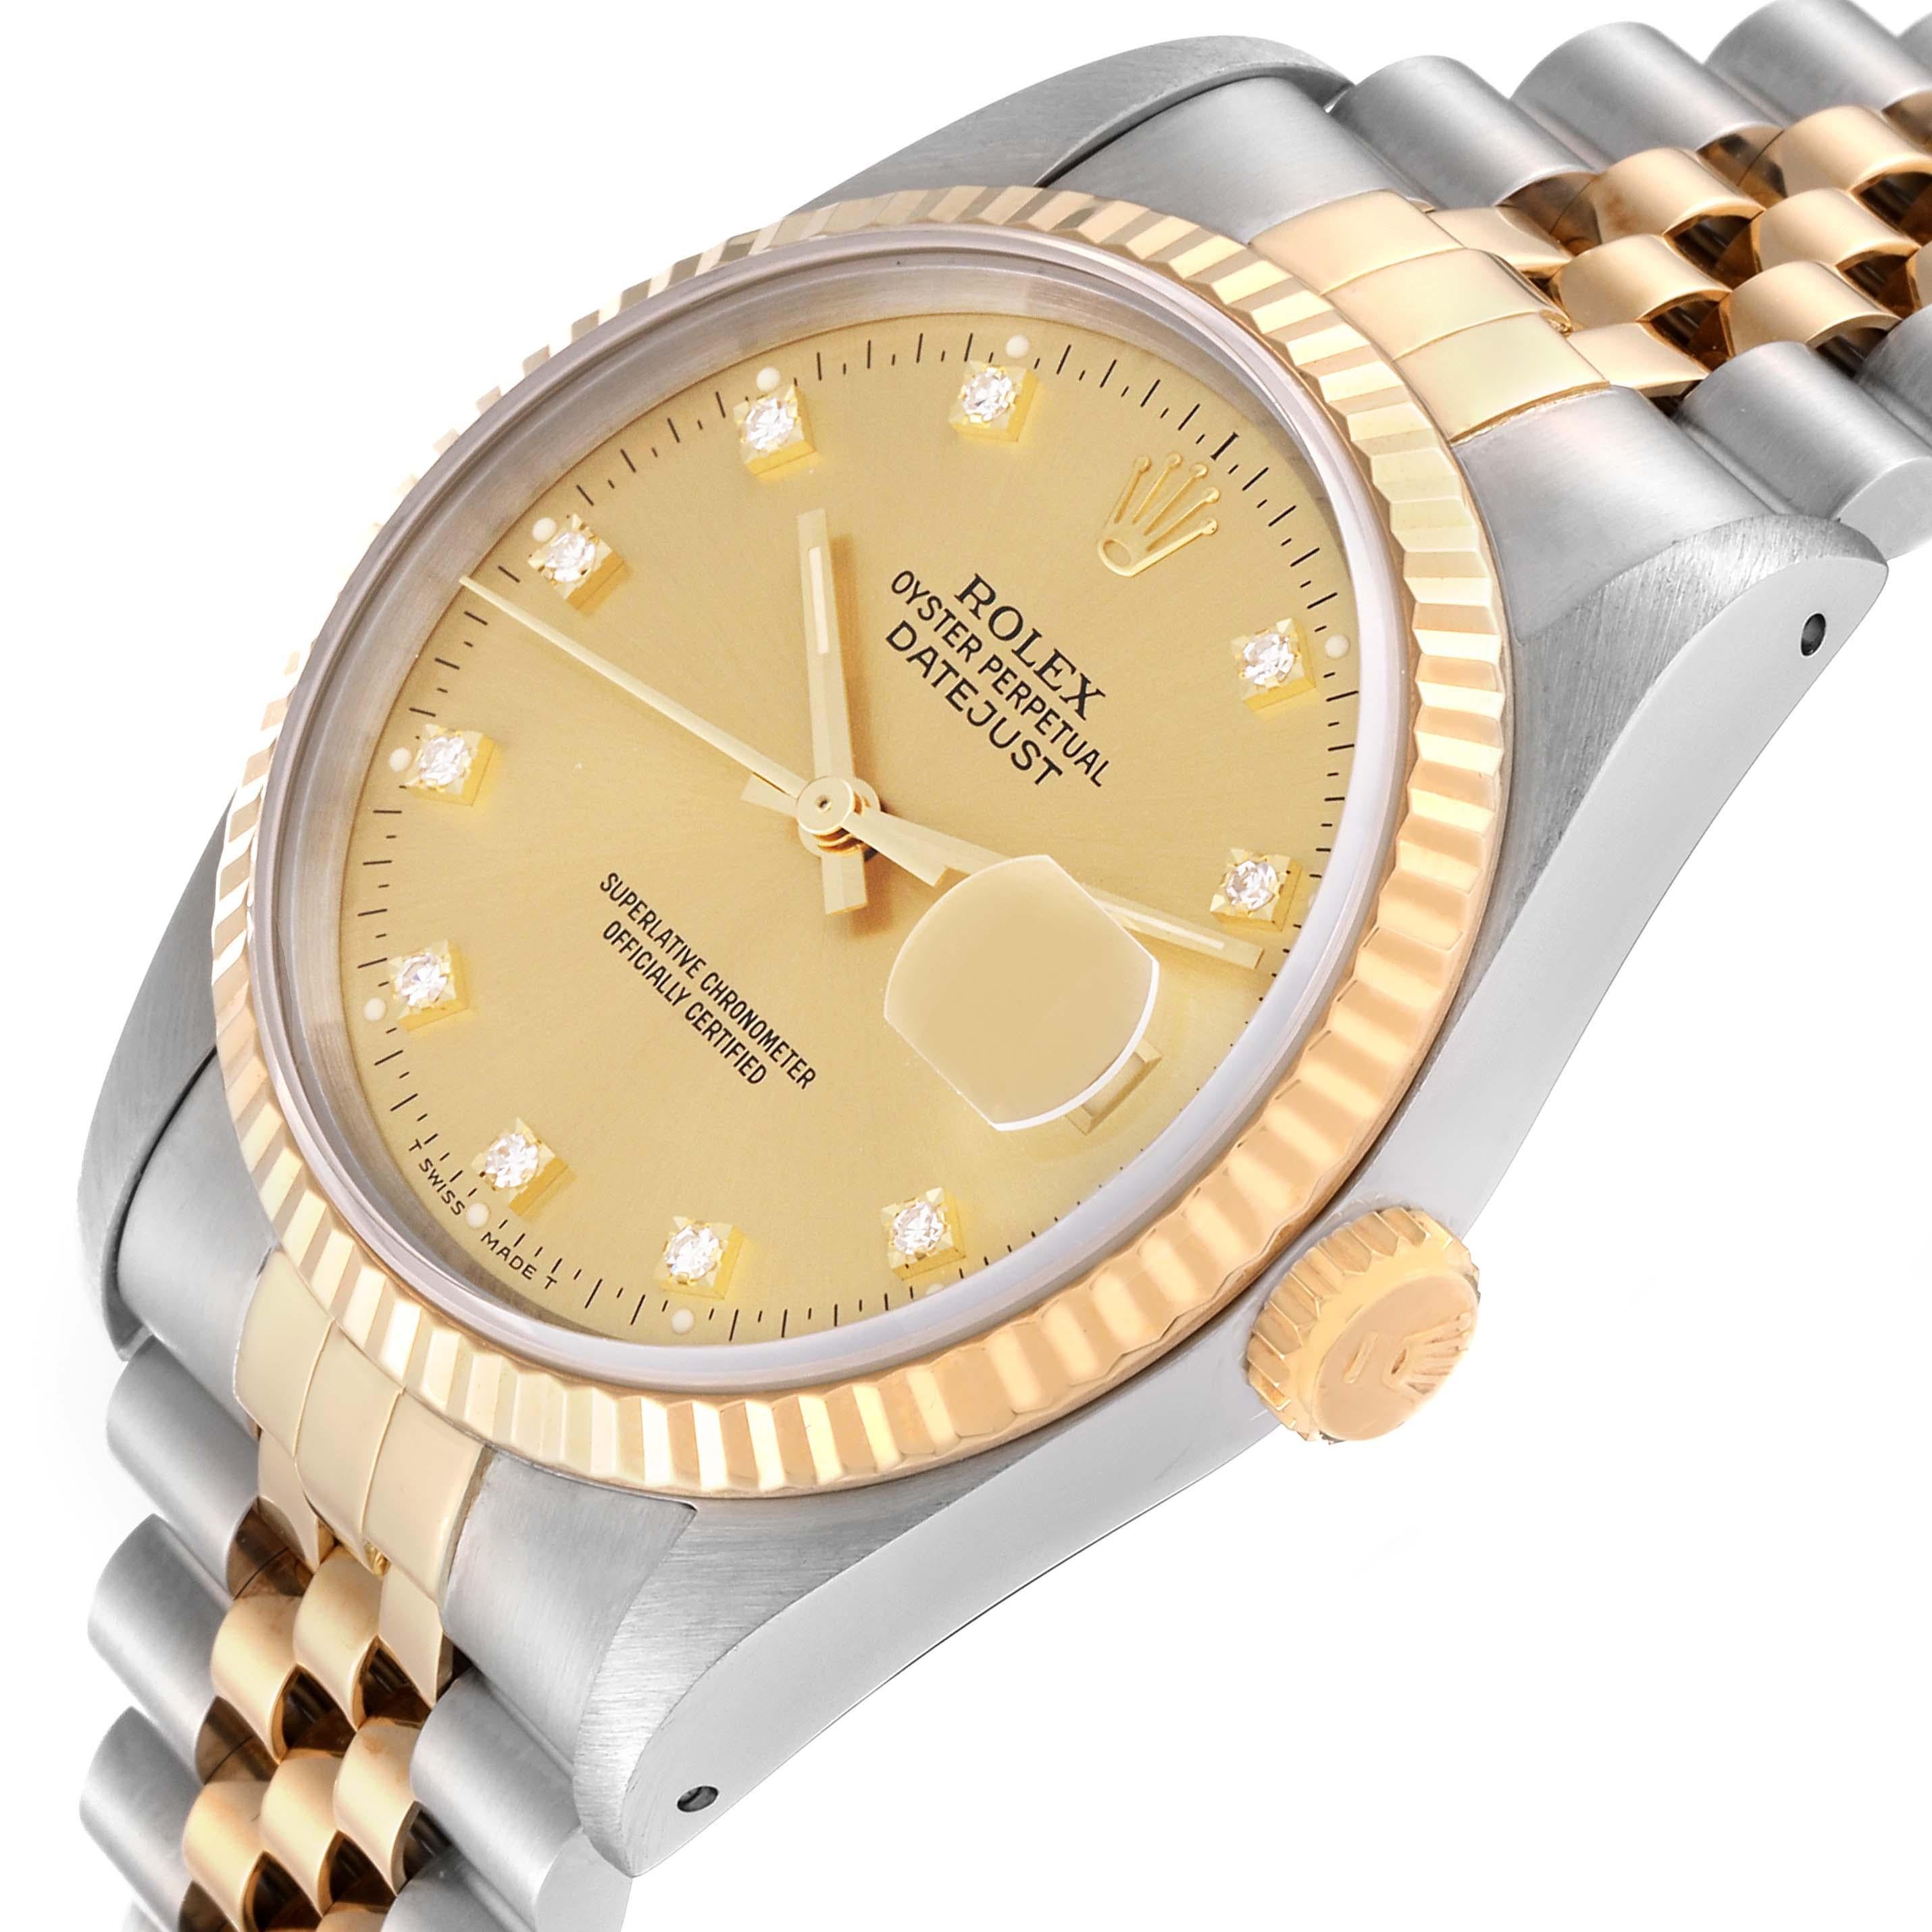 Rolex Datejust Champagne Diamond Dial Steel Yellow Gold Mens Watch 16233 In Excellent Condition For Sale In Atlanta, GA